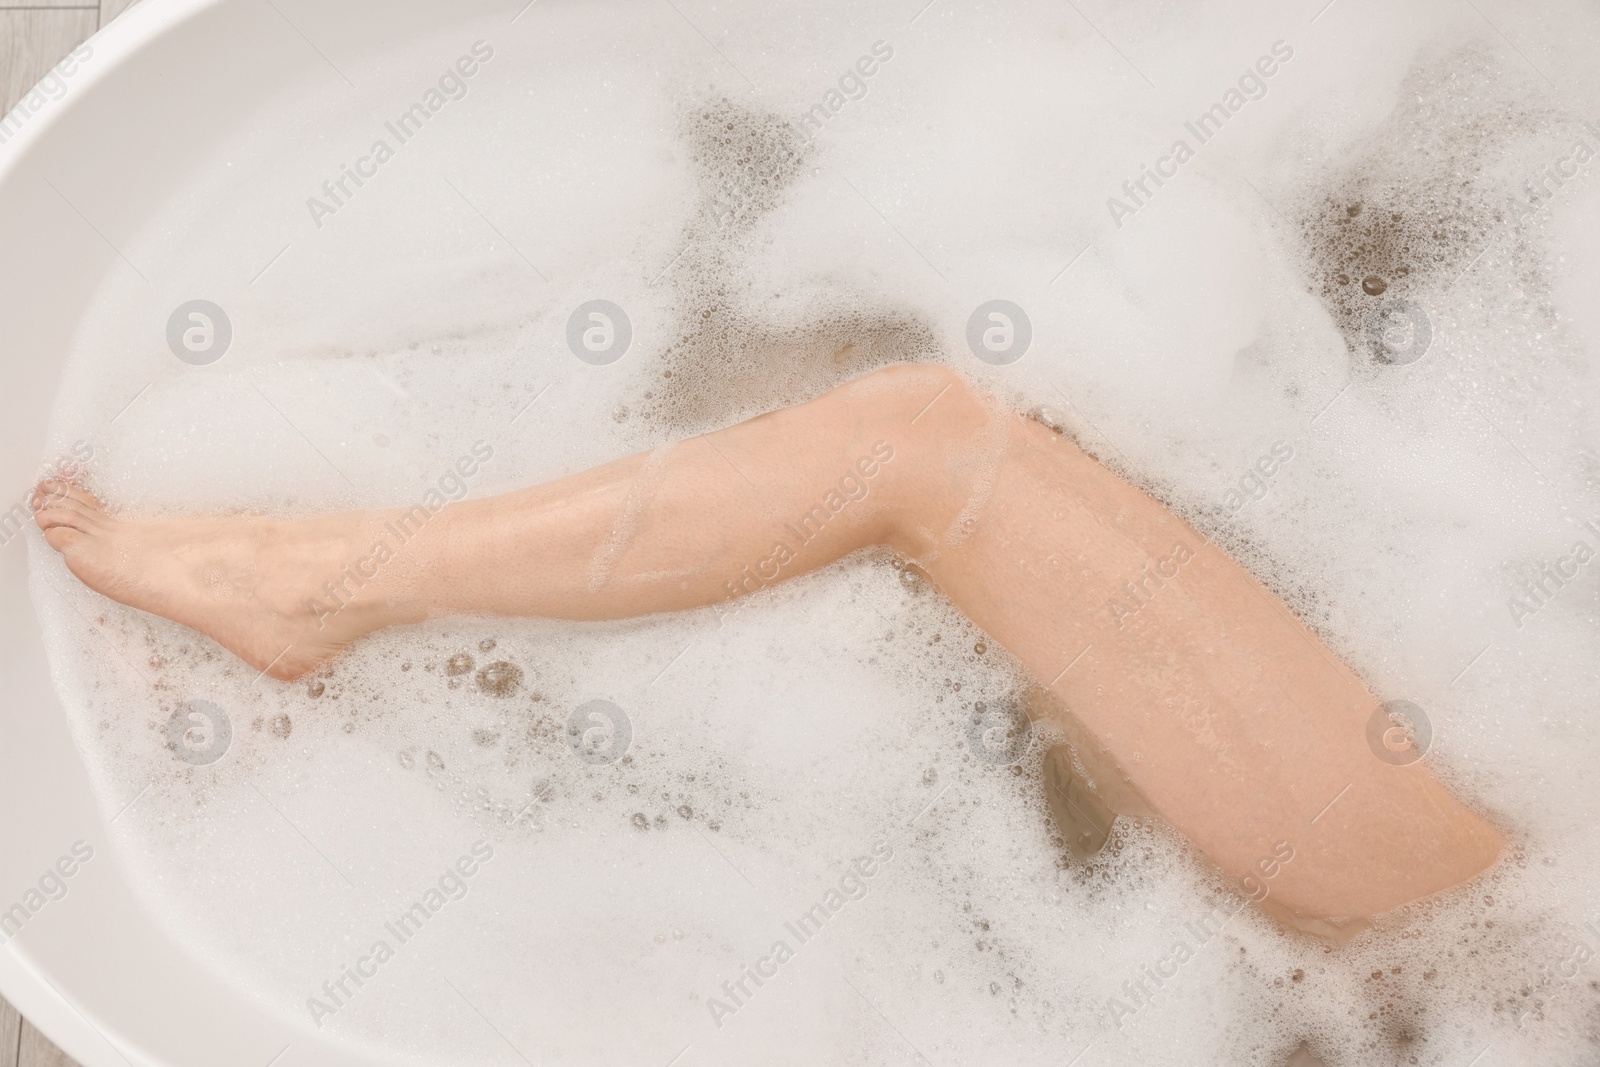 Photo of Woman taking bath with foam in tub, top view